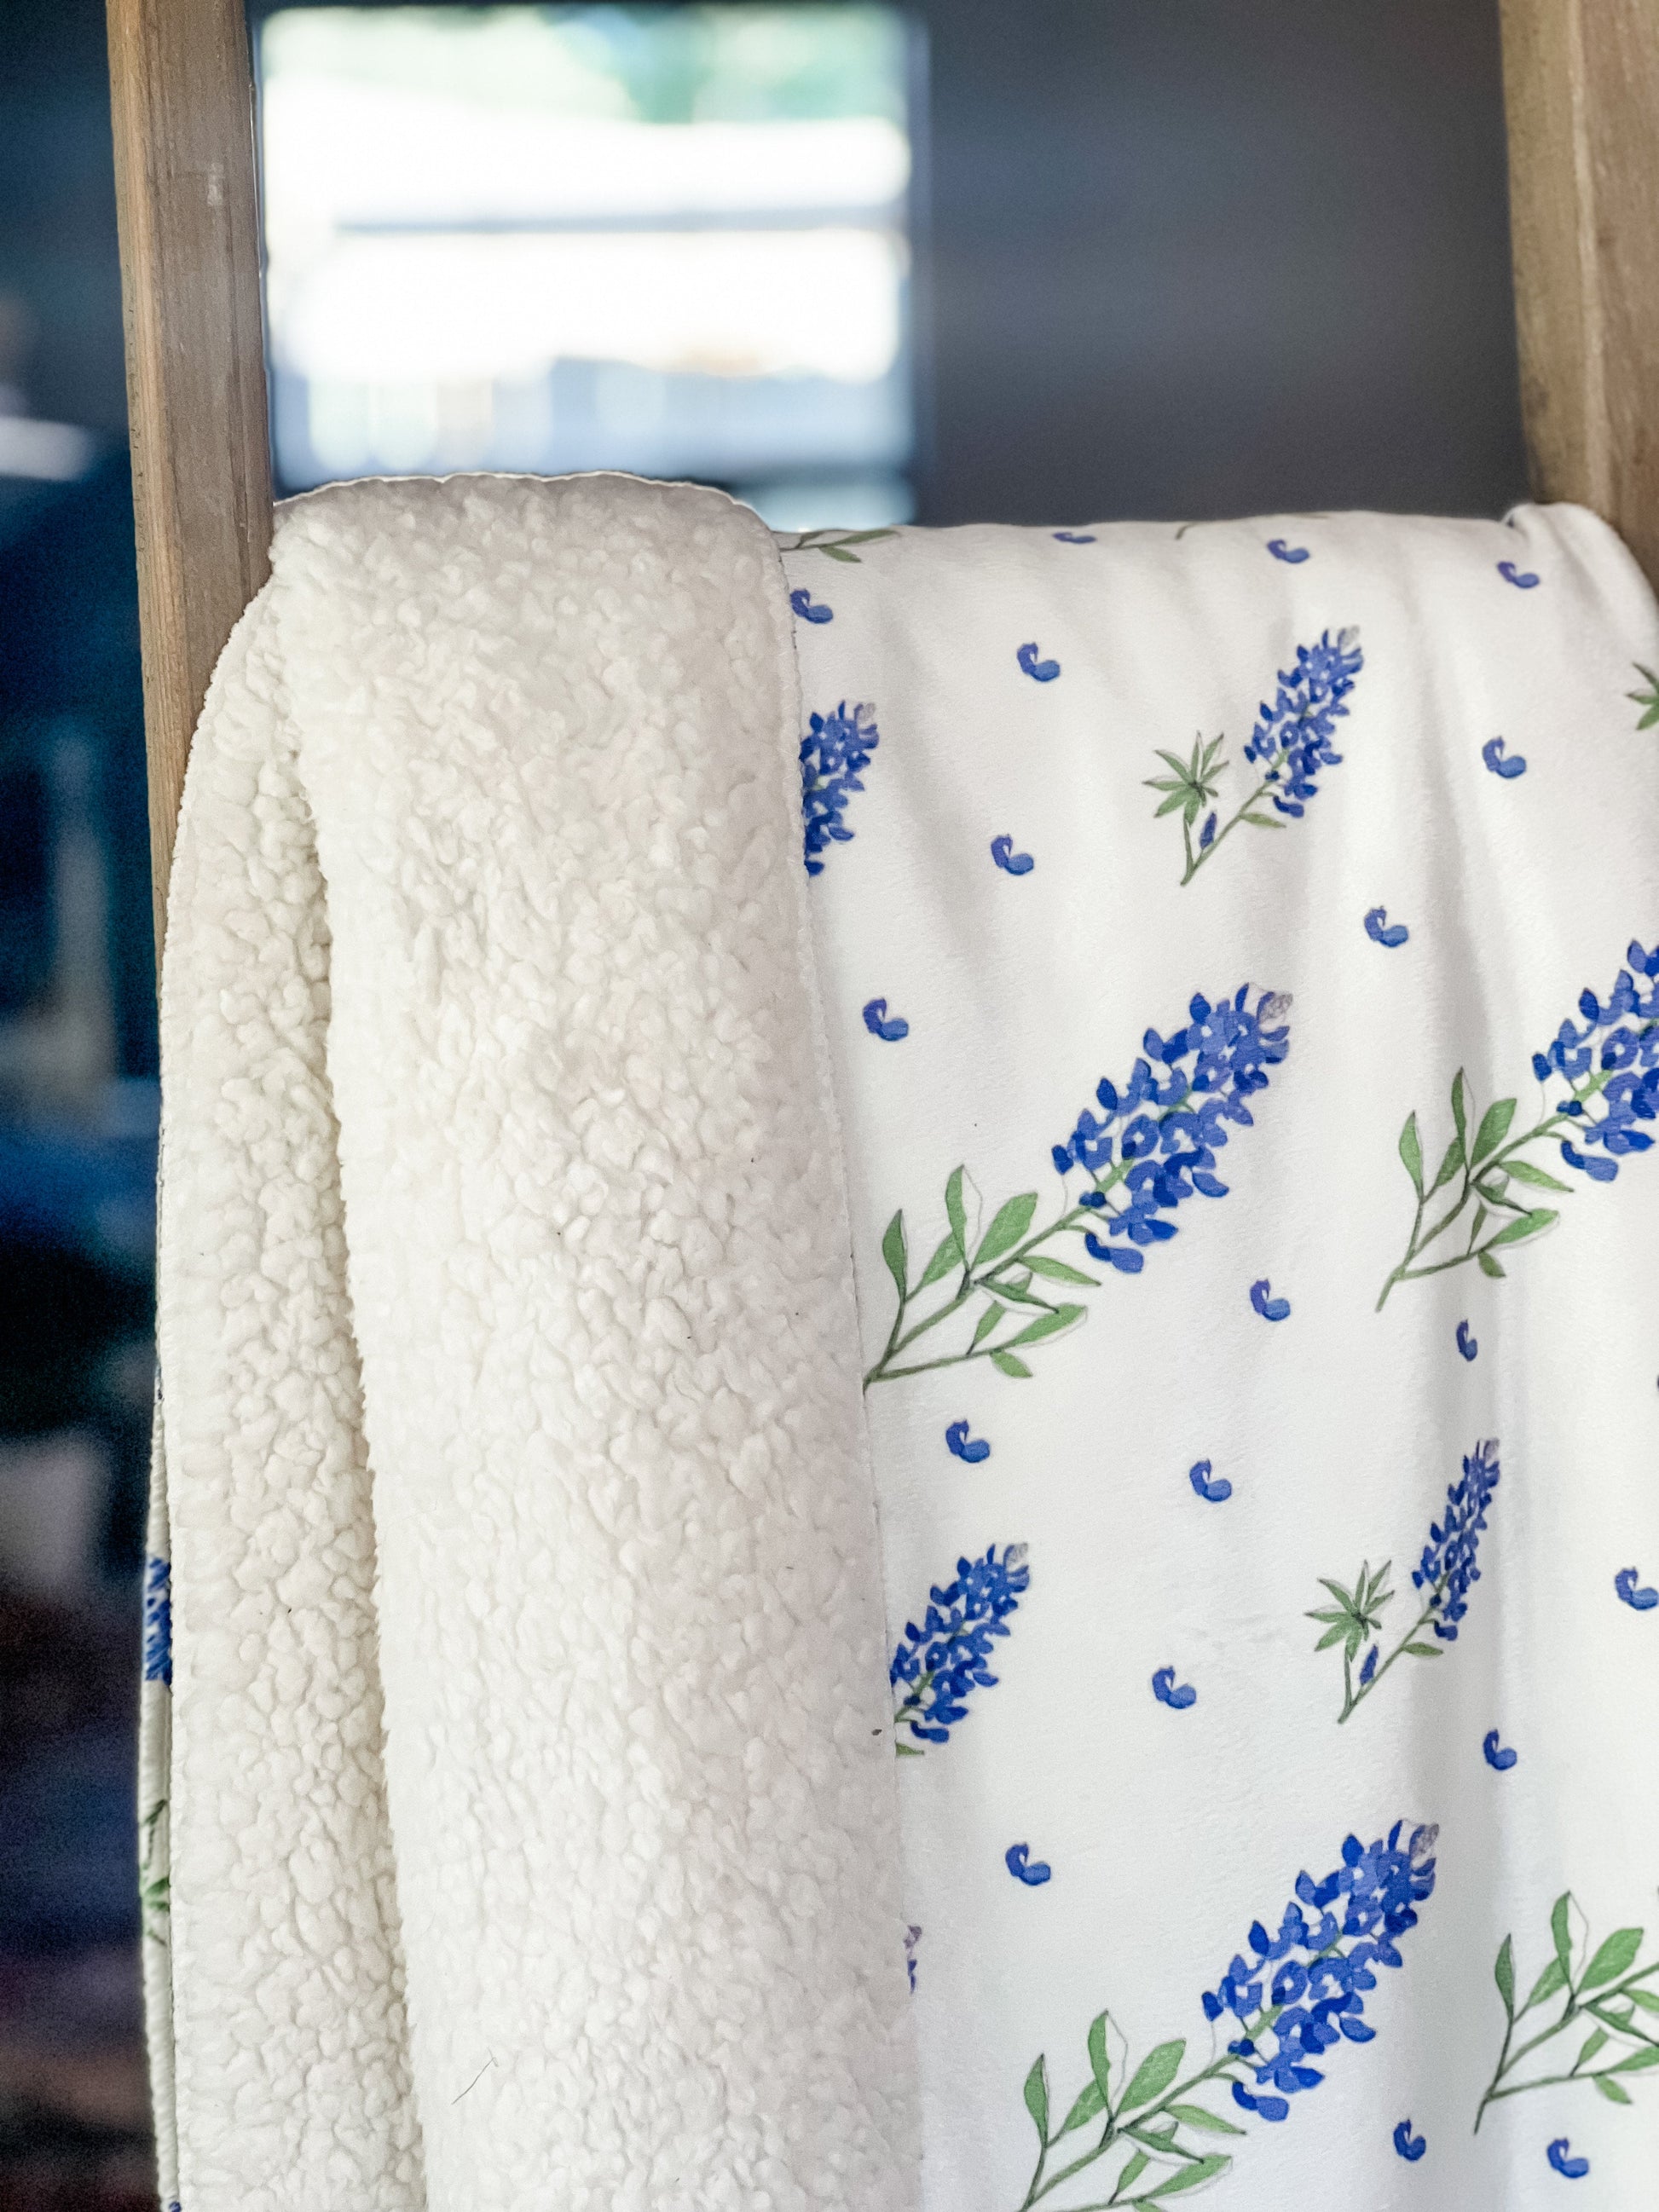 Bluebonnet-patterned plush throw blanket in shades of blue and green, measuring 60x80 inches, on a white background.